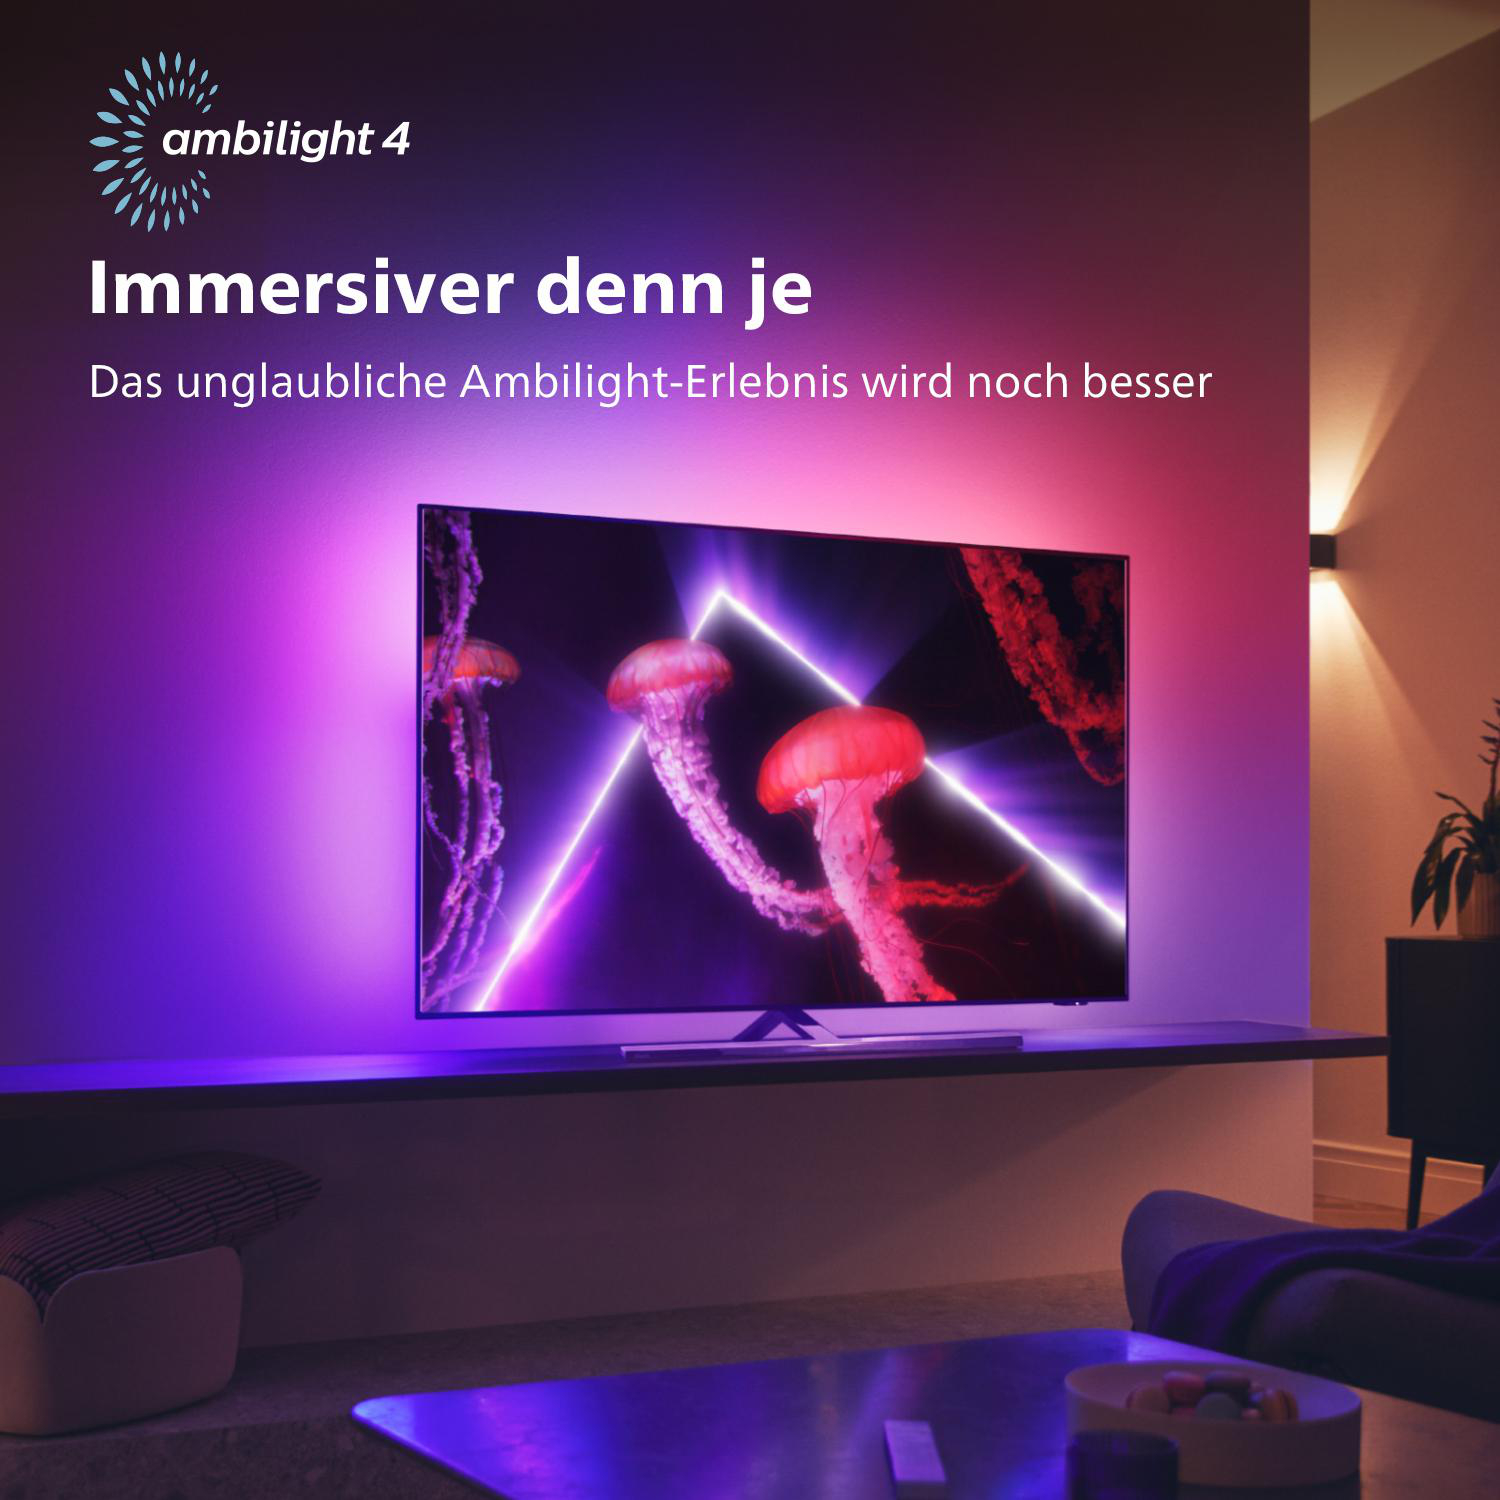 PHILIPS 77OLED807/12 OLED Fernseher (Flat, SMART UHD 11 77 Android / (R)) cm, TV™ 194 Ambilight, TV, 4K, Zoll